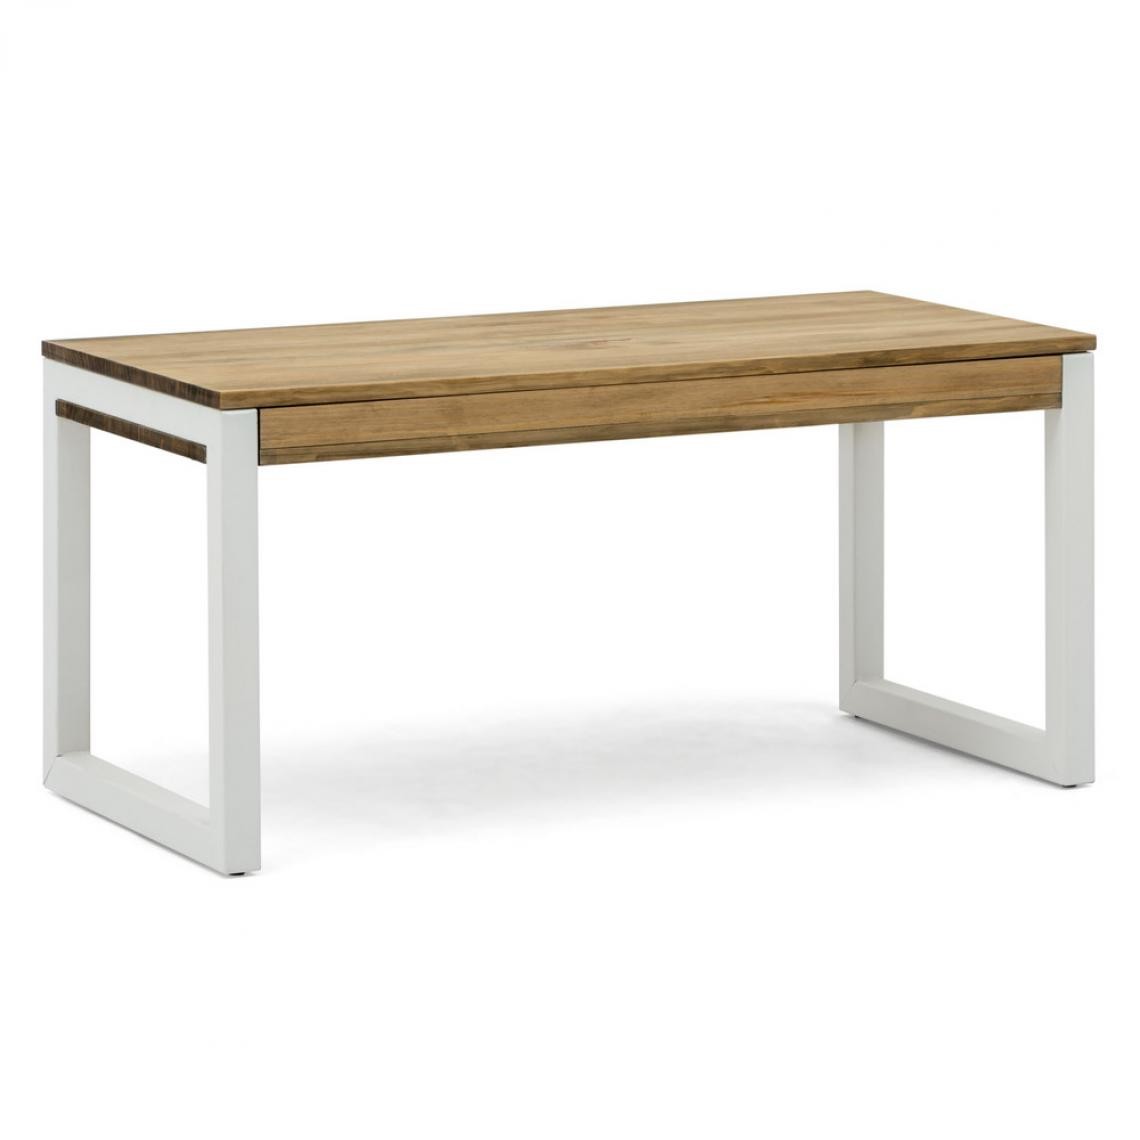 BOX FURNITURE - Table basse relevable iCub Strong ECO 50x100x52 cm 18mm Blanc-Vieilli - Box Furniture - Tables basses